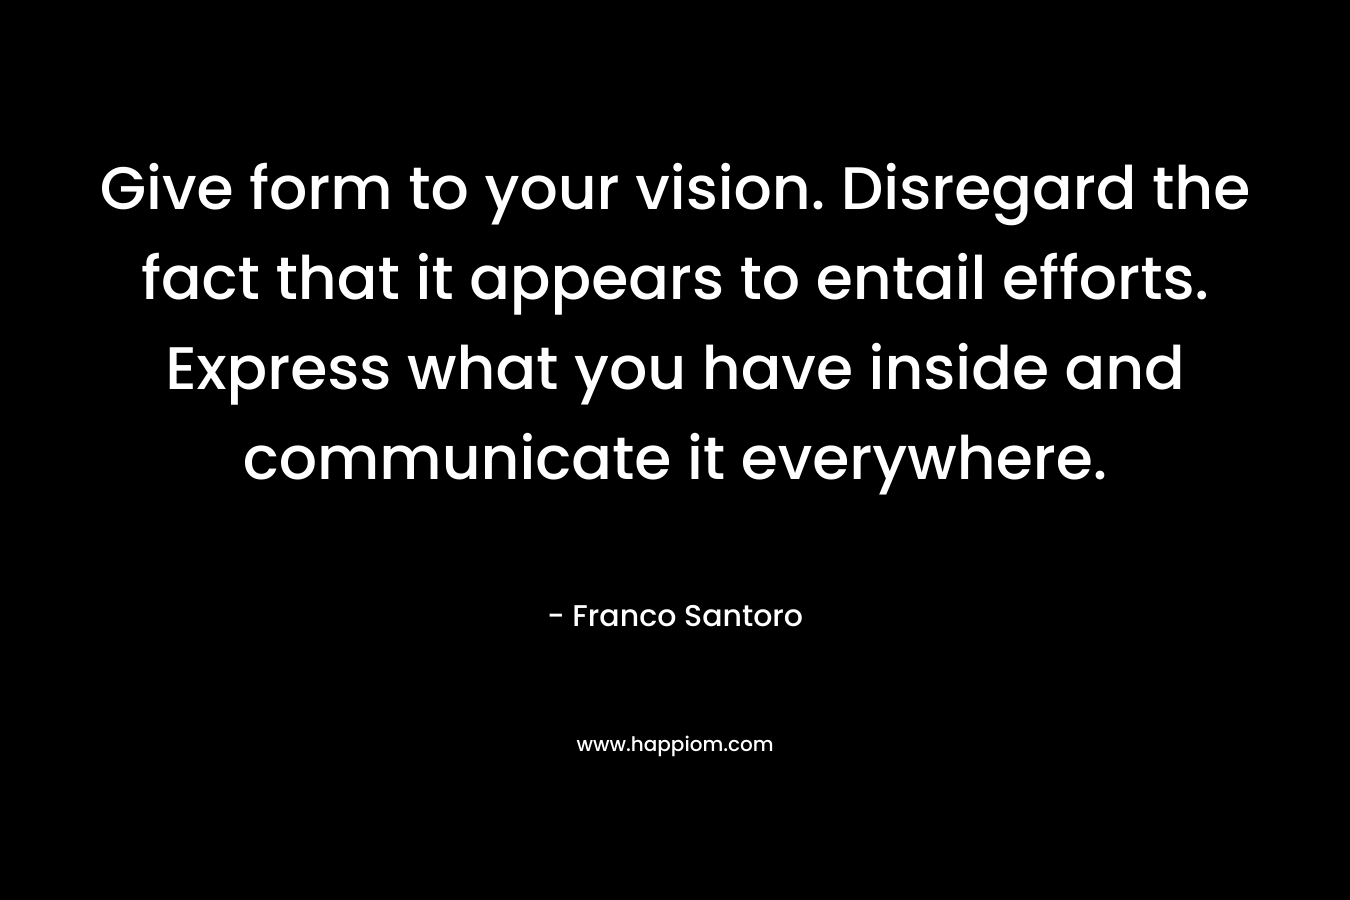 Give form to your vision. Disregard the fact that it appears to entail efforts. Express what you have inside and communicate it everywhere.